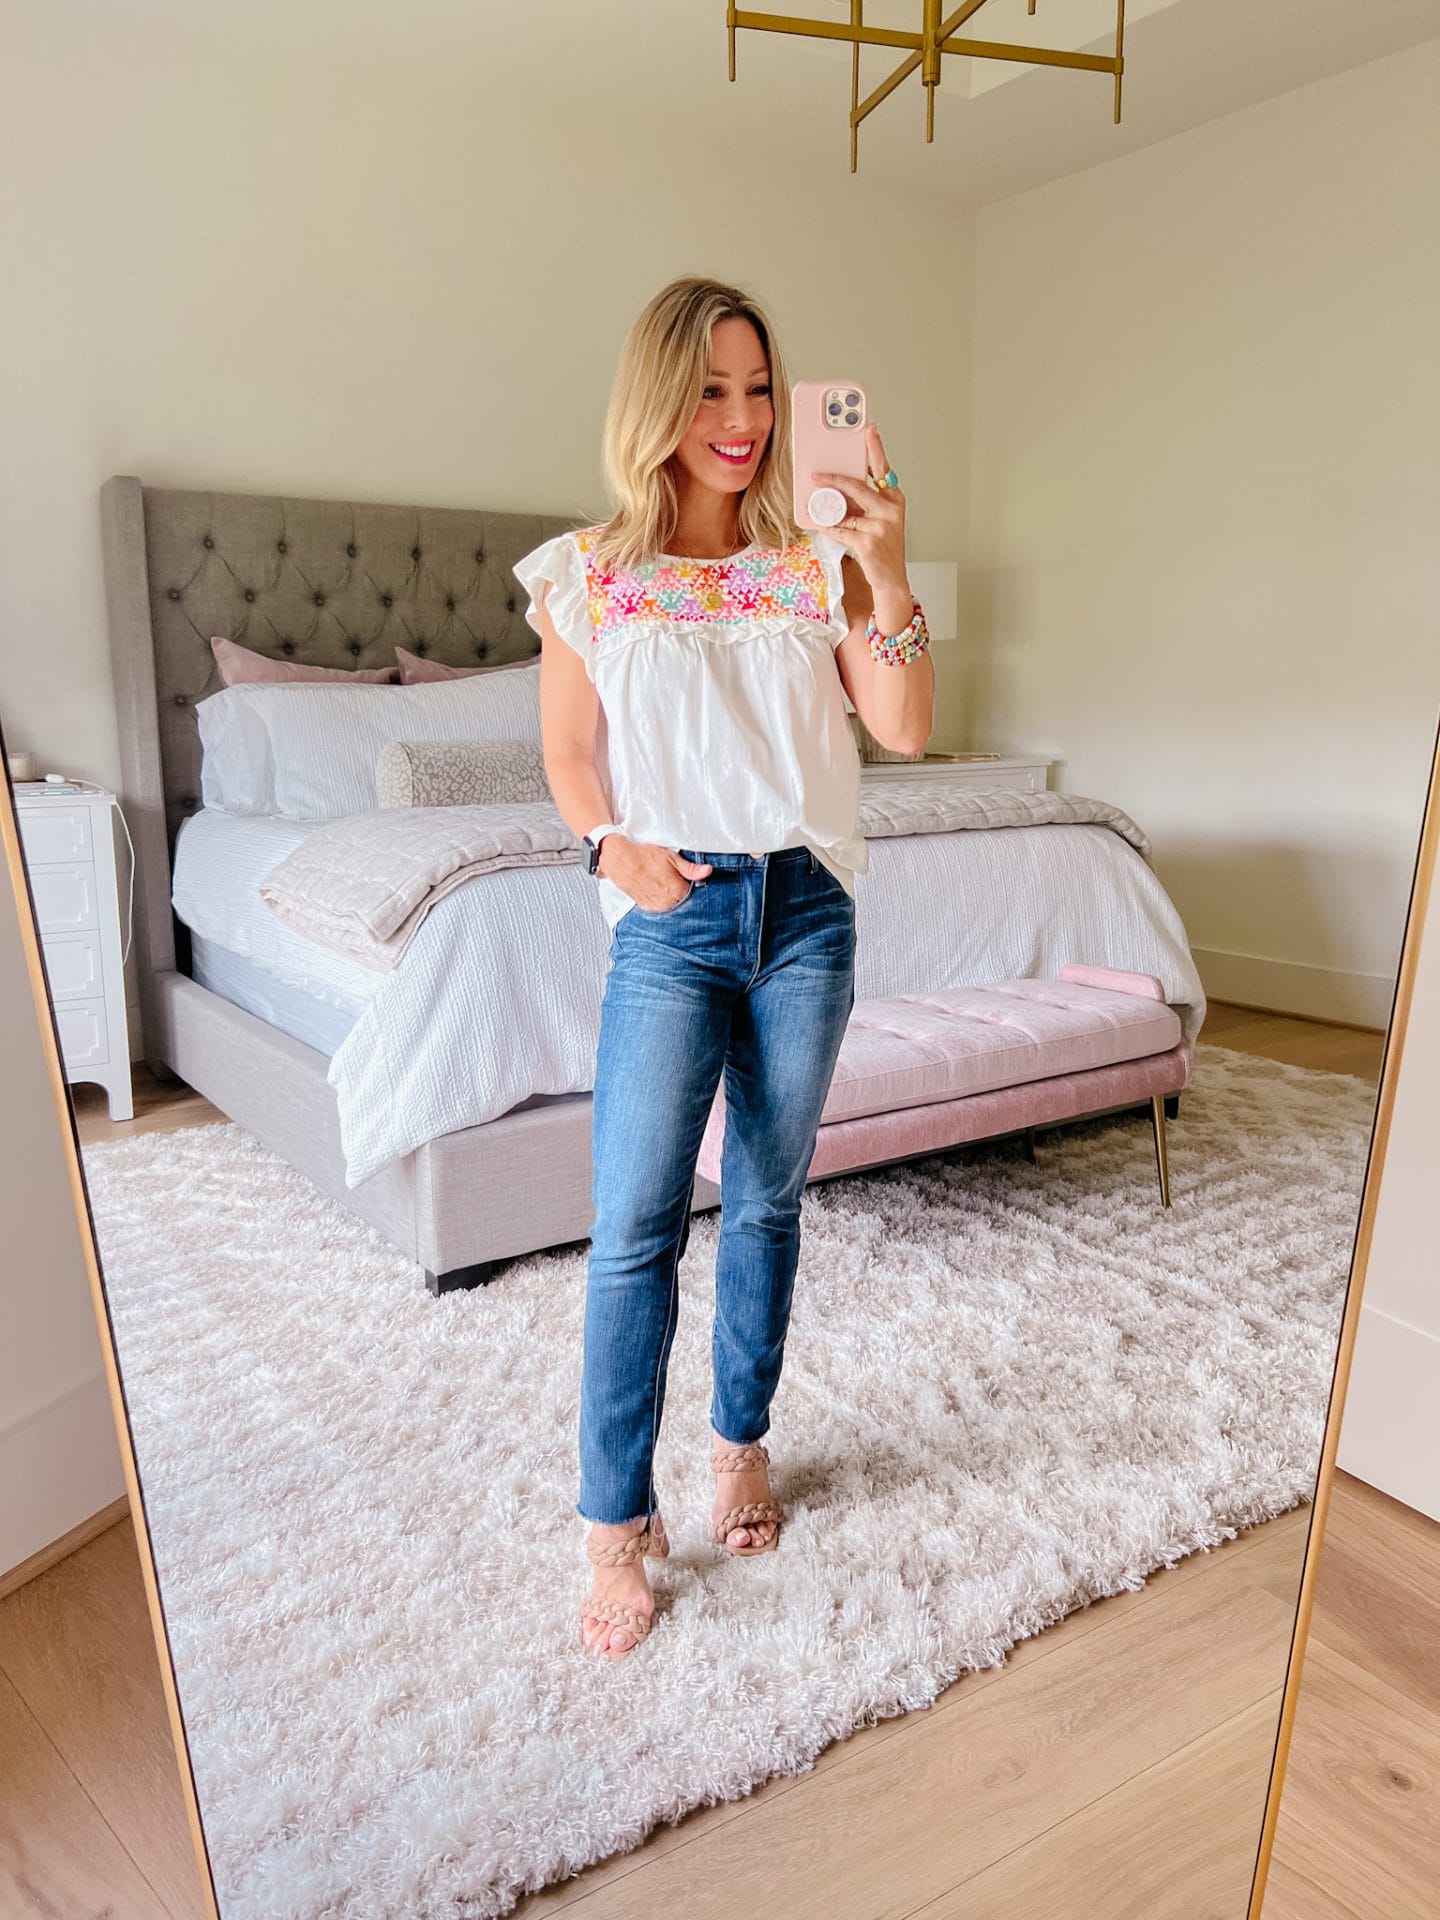 White Top with Colored Embroidery, Jeans, Sandals 